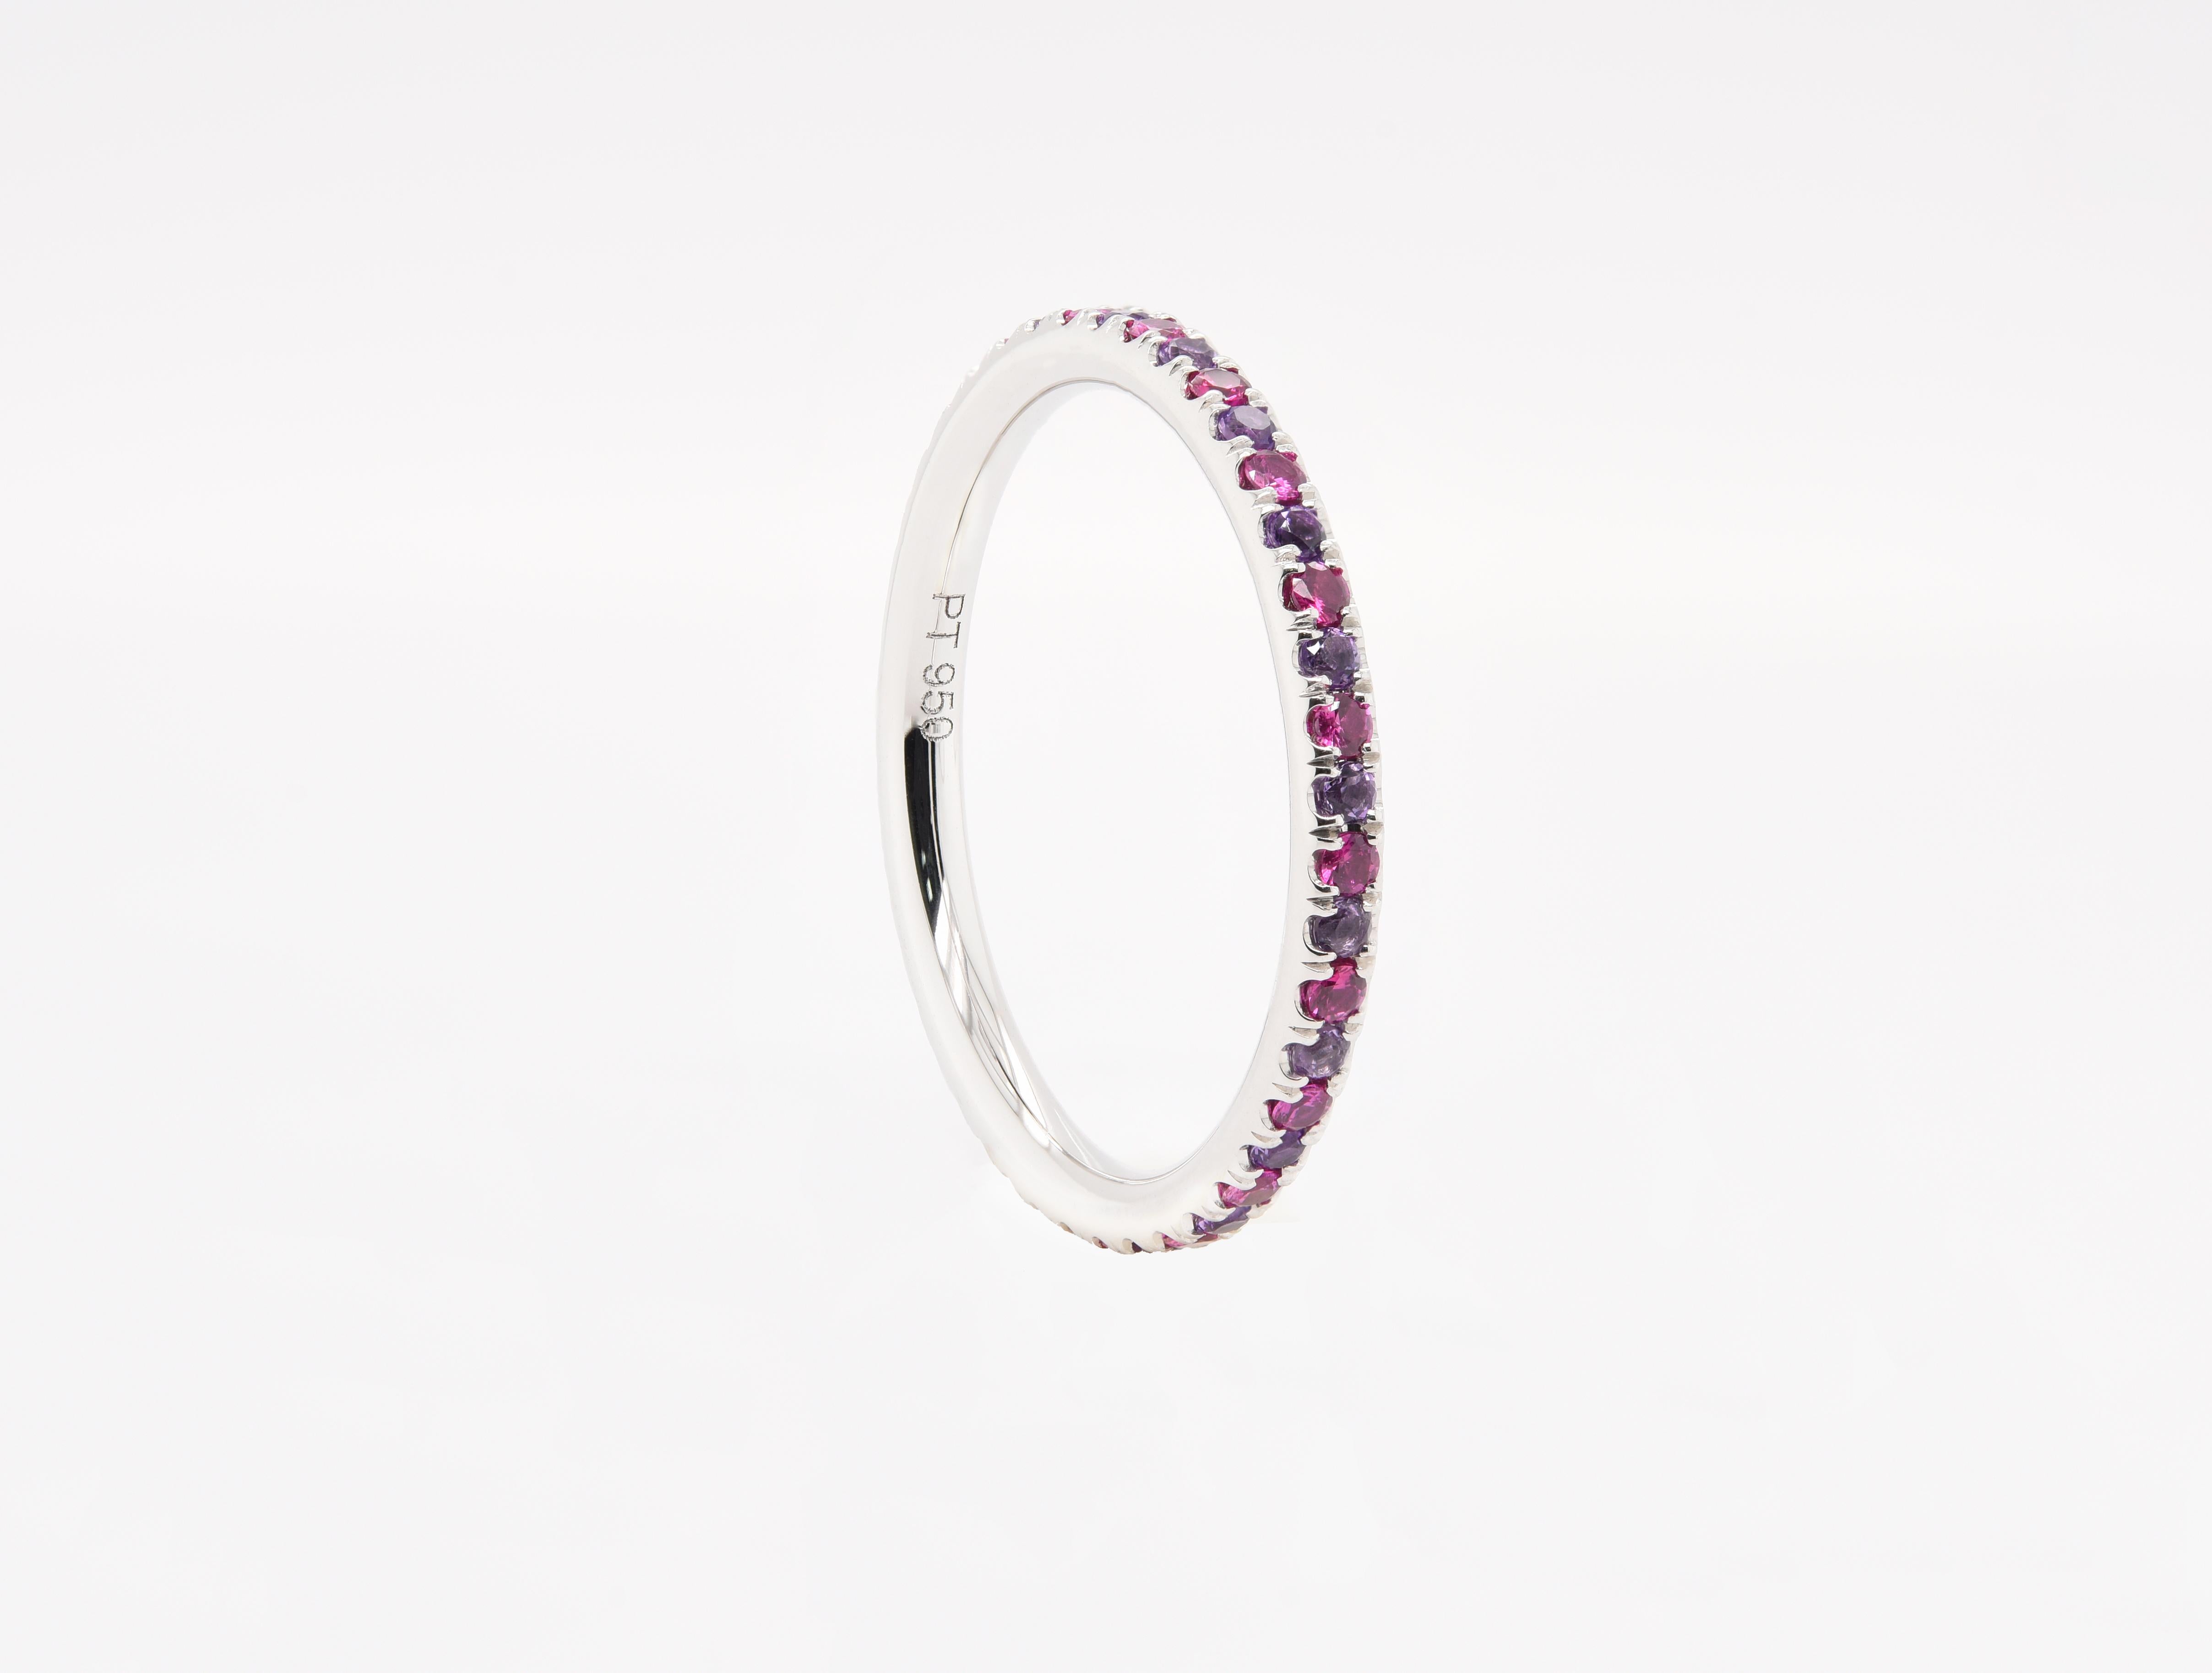 JAG New York Eternity Band with Your Choice of Diamonds and Gemstones For Sale 6